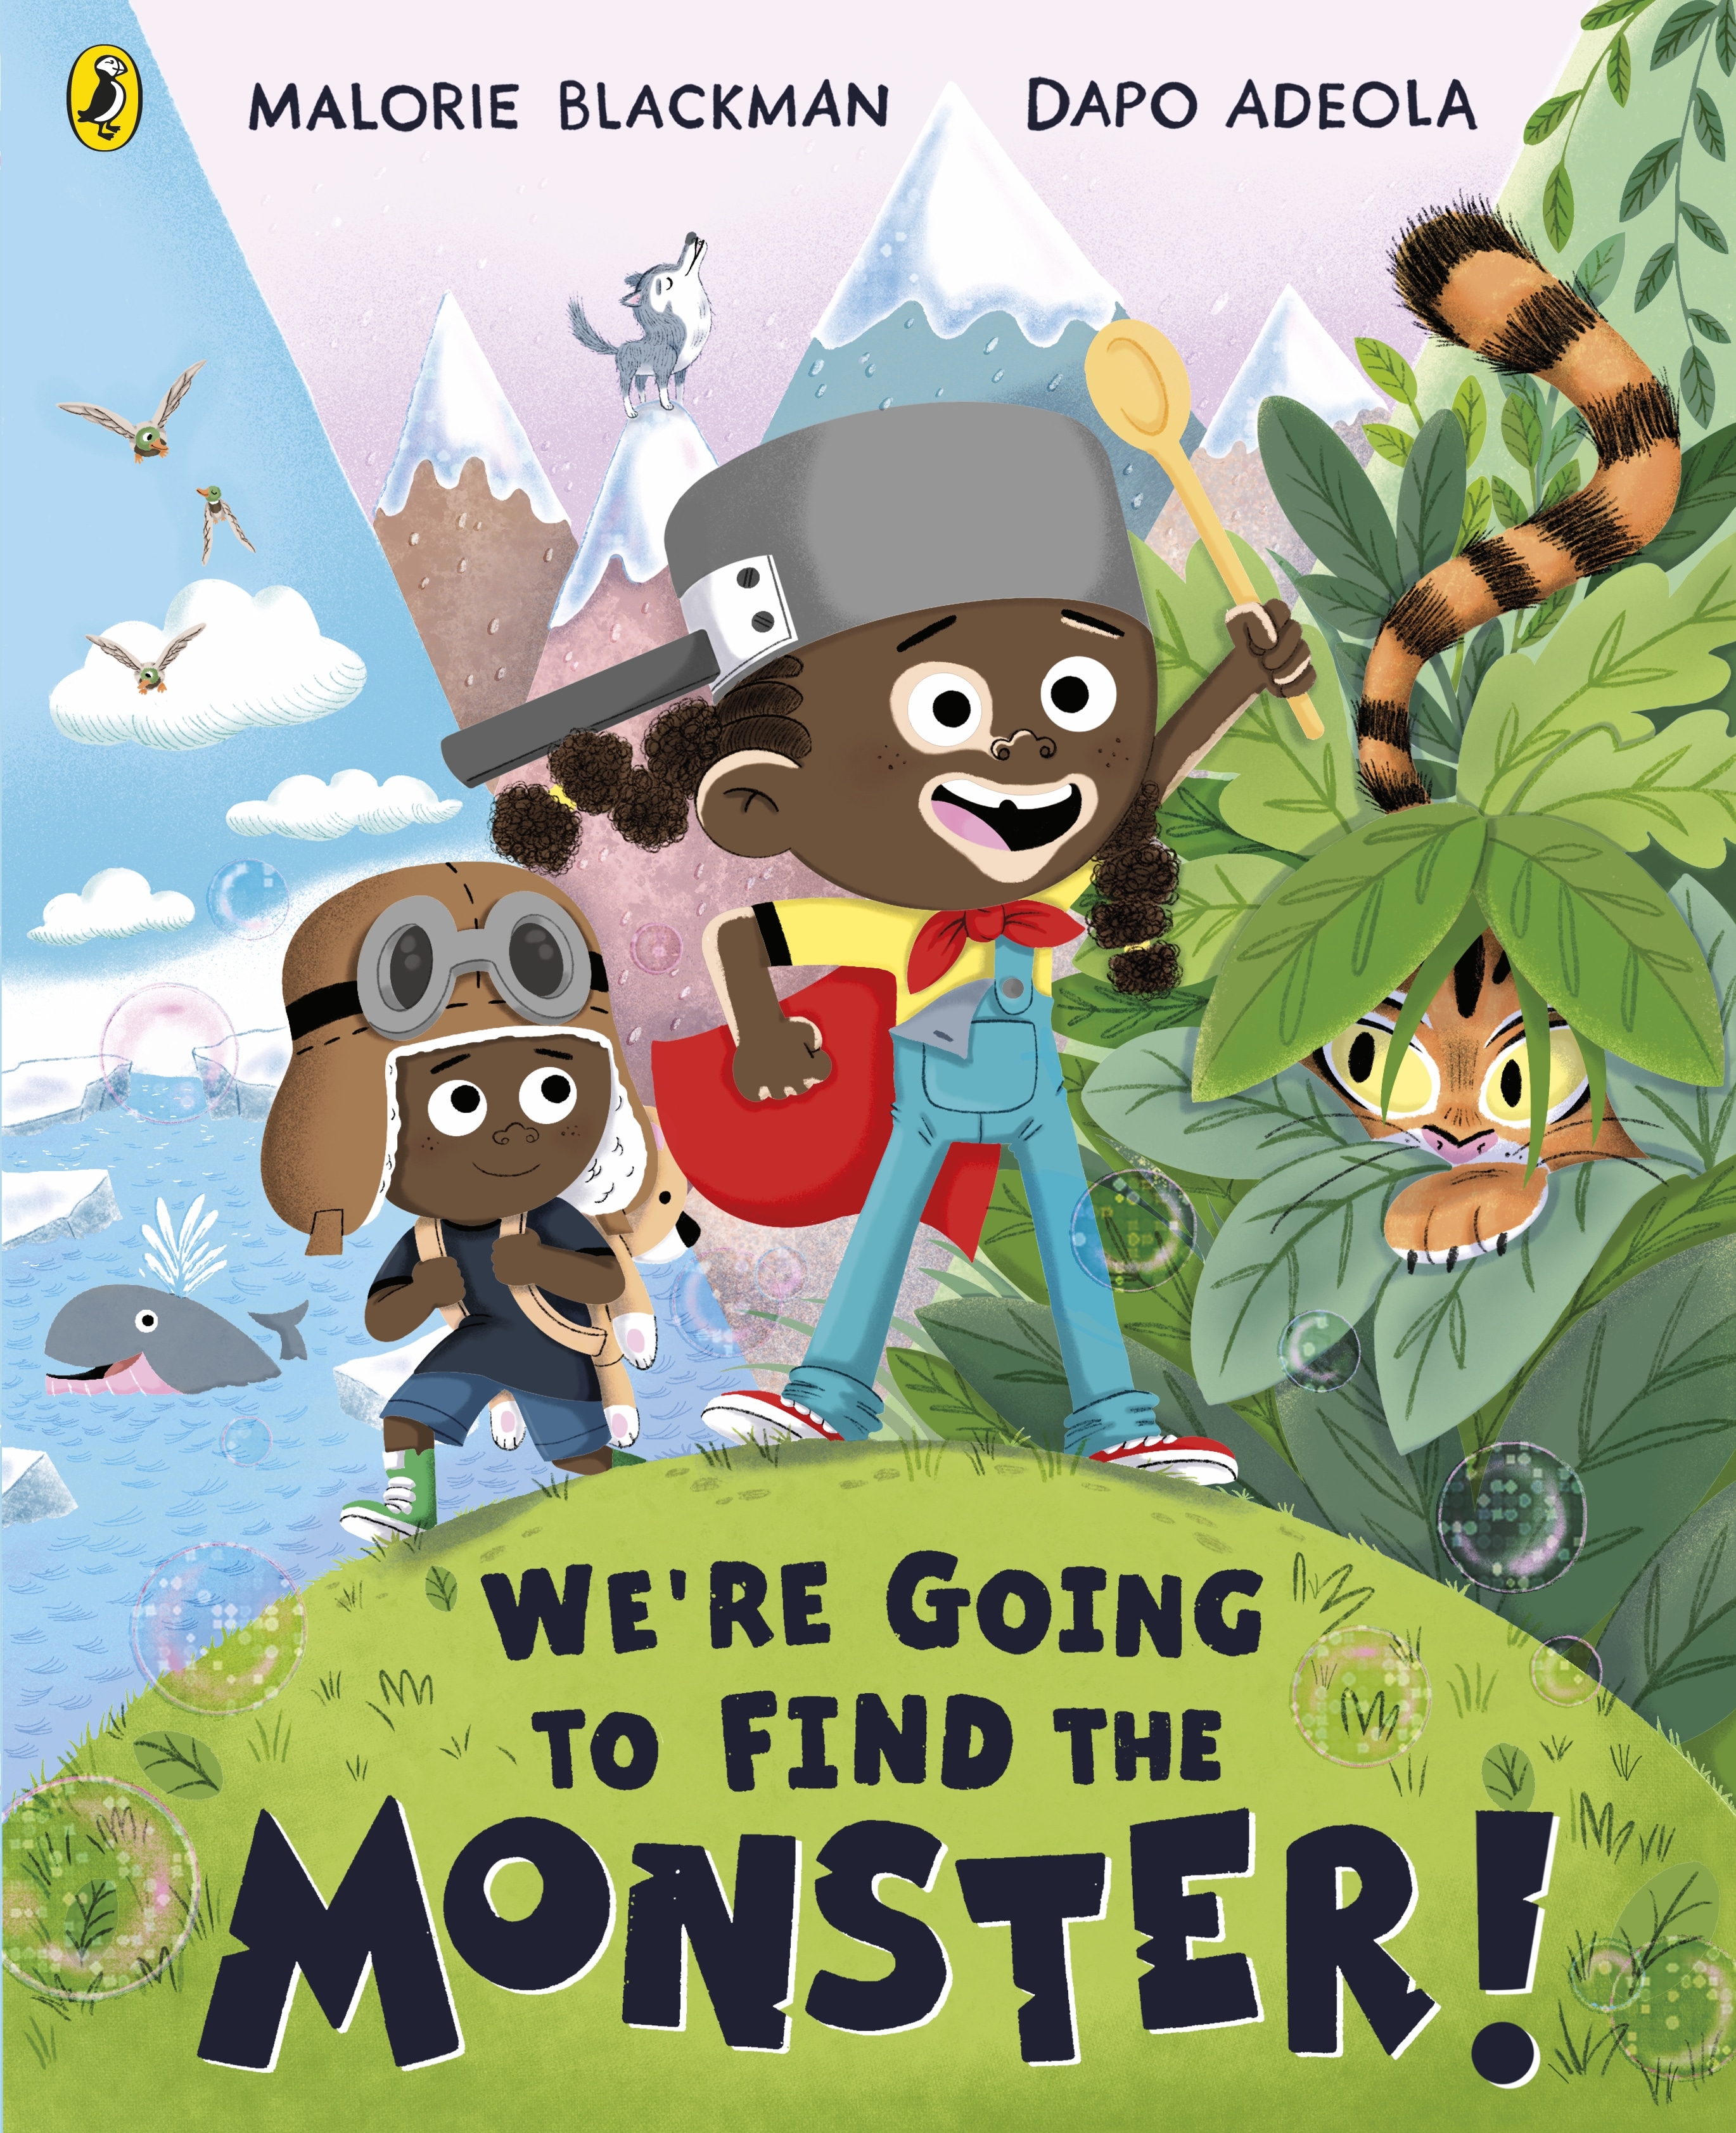 Book “We’re Going to Find the Monster” by Malorie Blackman, Dapo Adeola — September 2, 2021